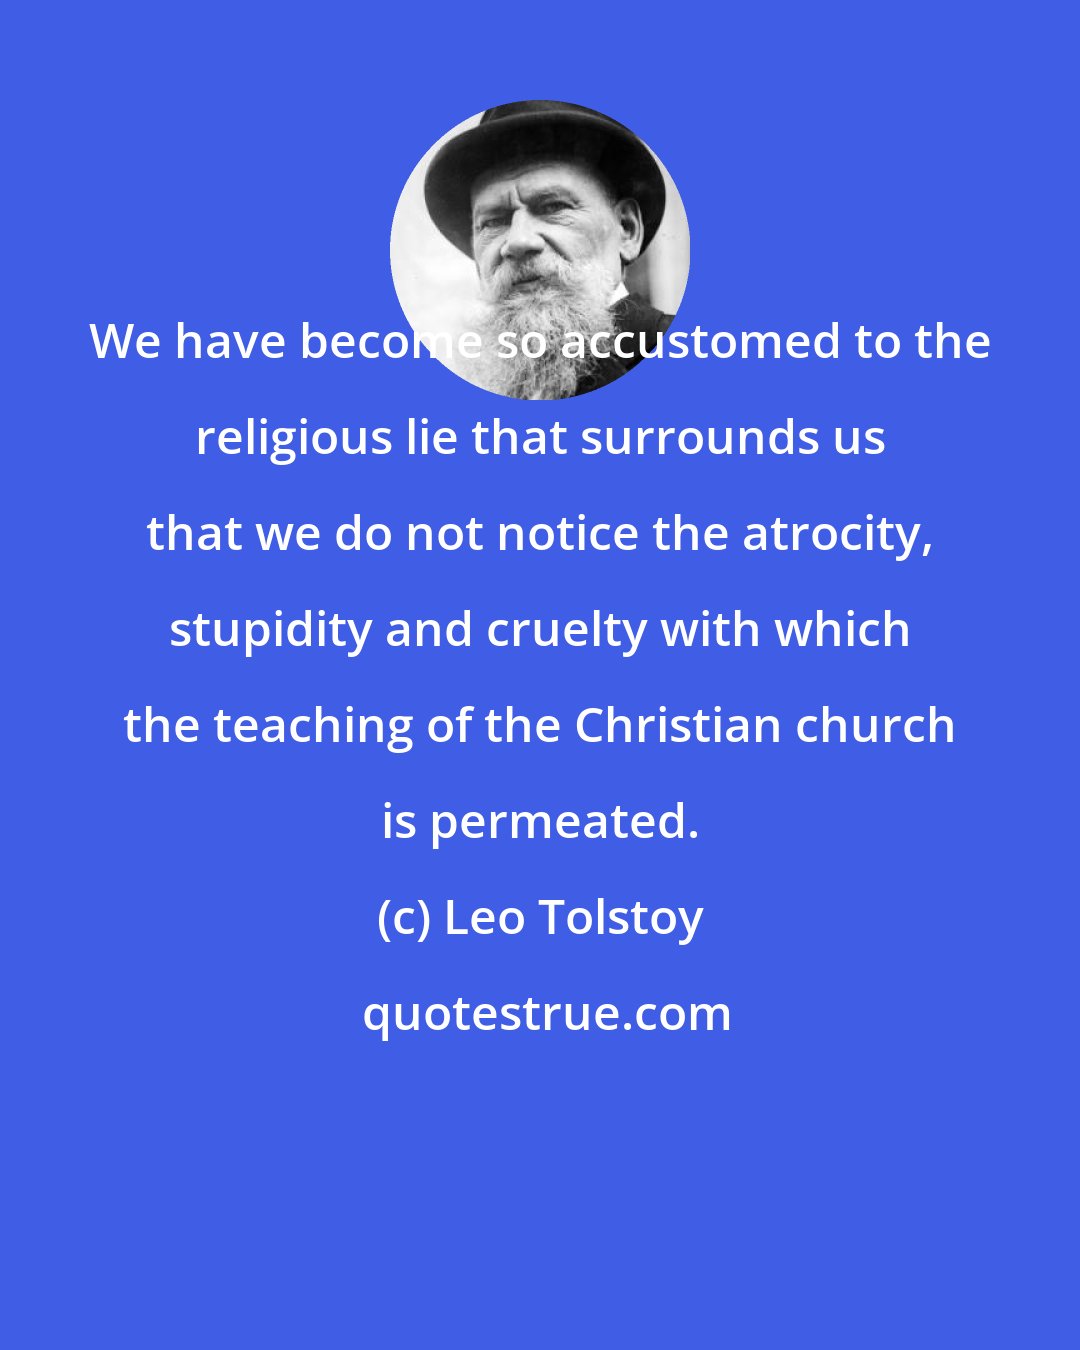 Leo Tolstoy: We have become so accustomed to the religious lie that surrounds us that we do not notice the atrocity, stupidity and cruelty with which the teaching of the Christian church is permeated.